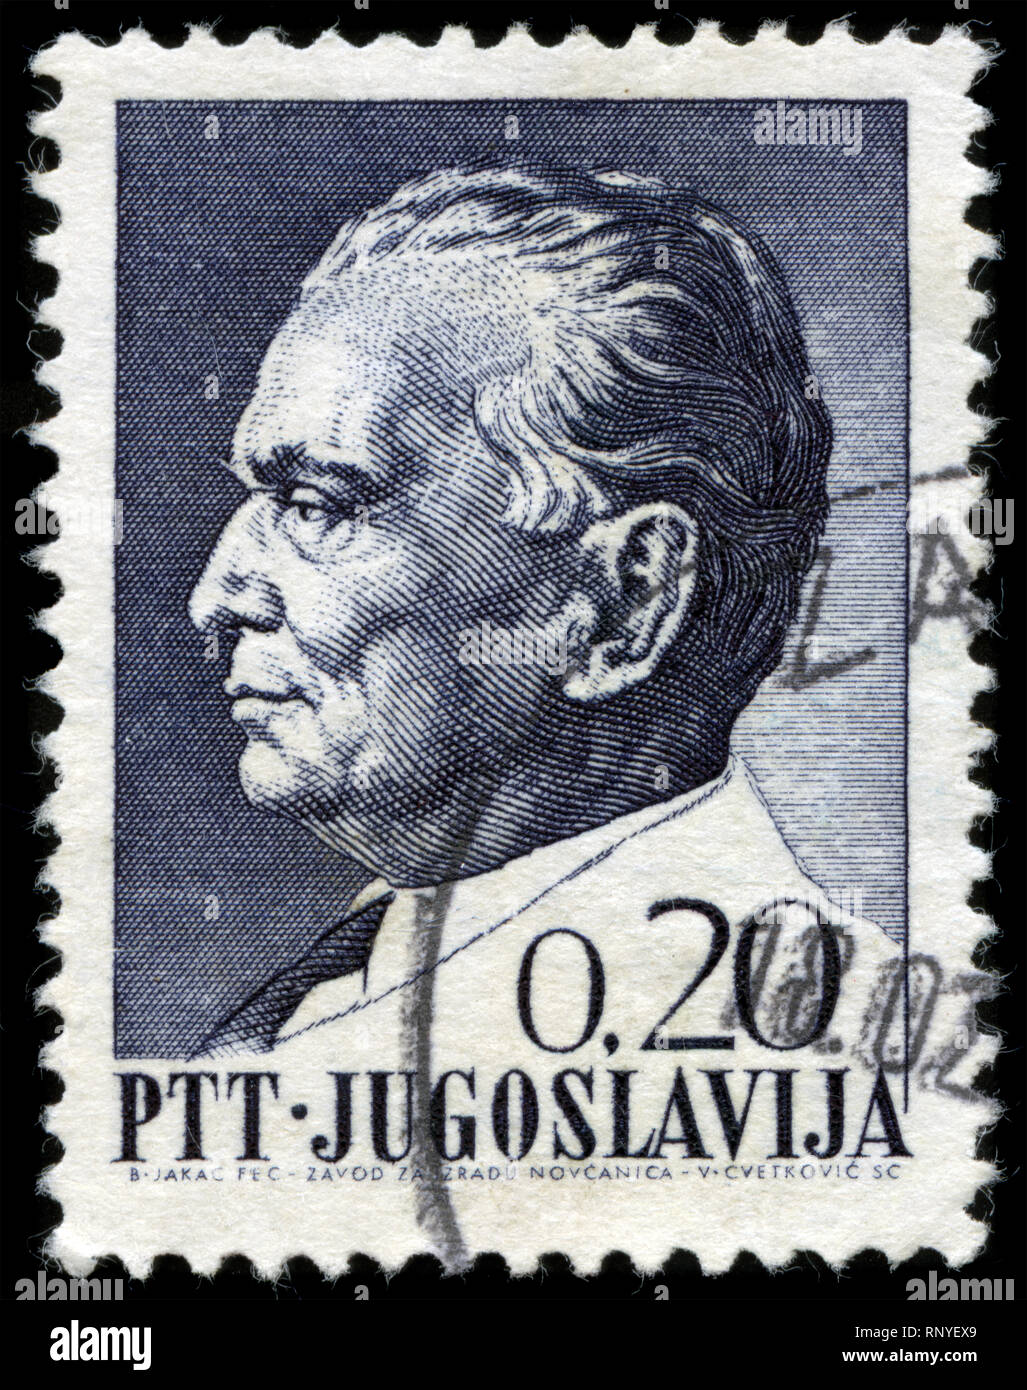 Postage stamp from the former state of Yugoslavia in the President Tito series issued in 1968 Stock Photo